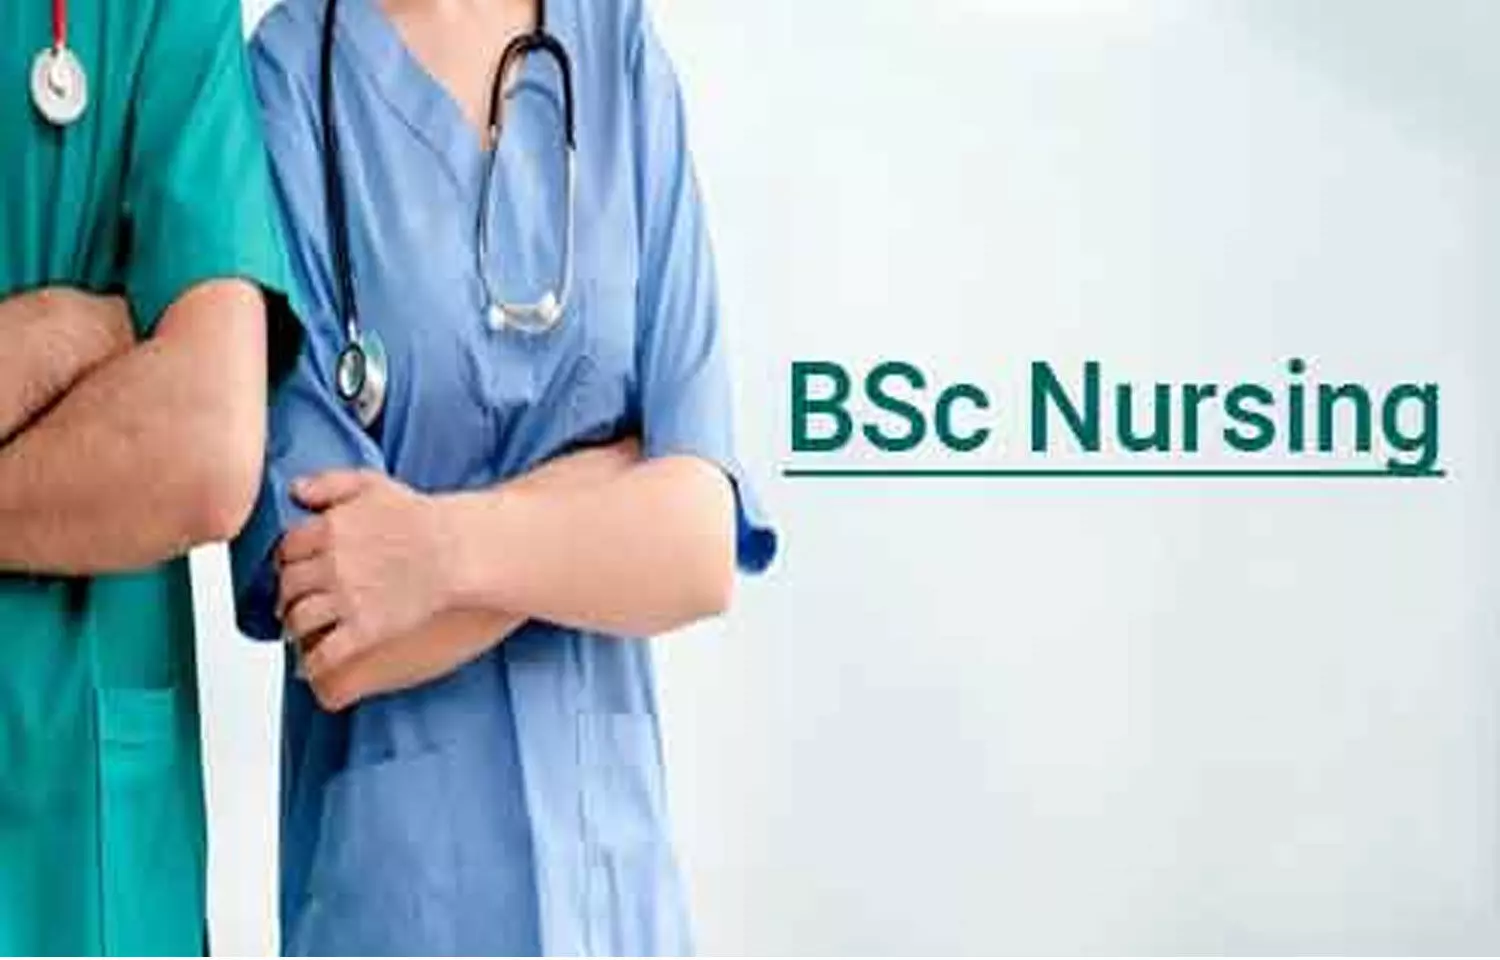 BSc Nursing exams 2020: JIPMER releases revised theory, practical time table; info on exit exam fee